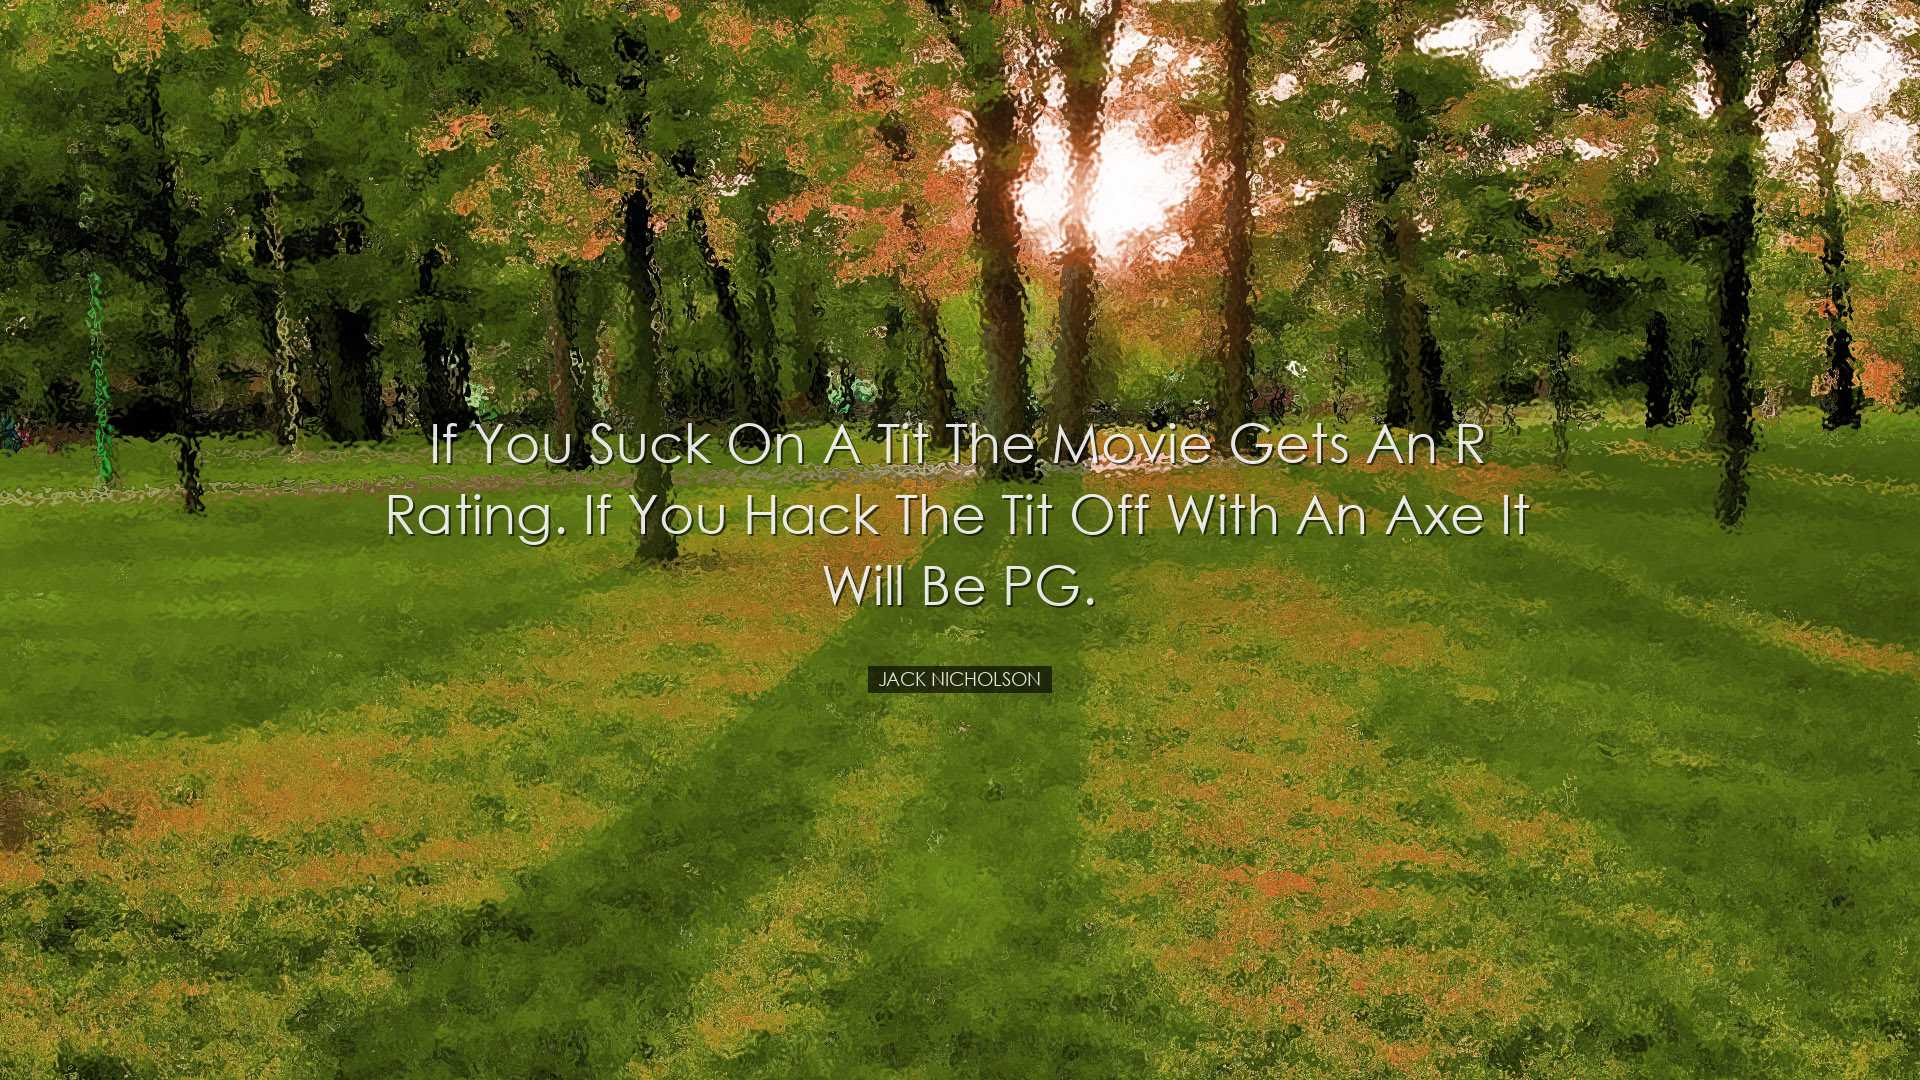 If you suck on a tit the movie gets an R rating. If you hack the t